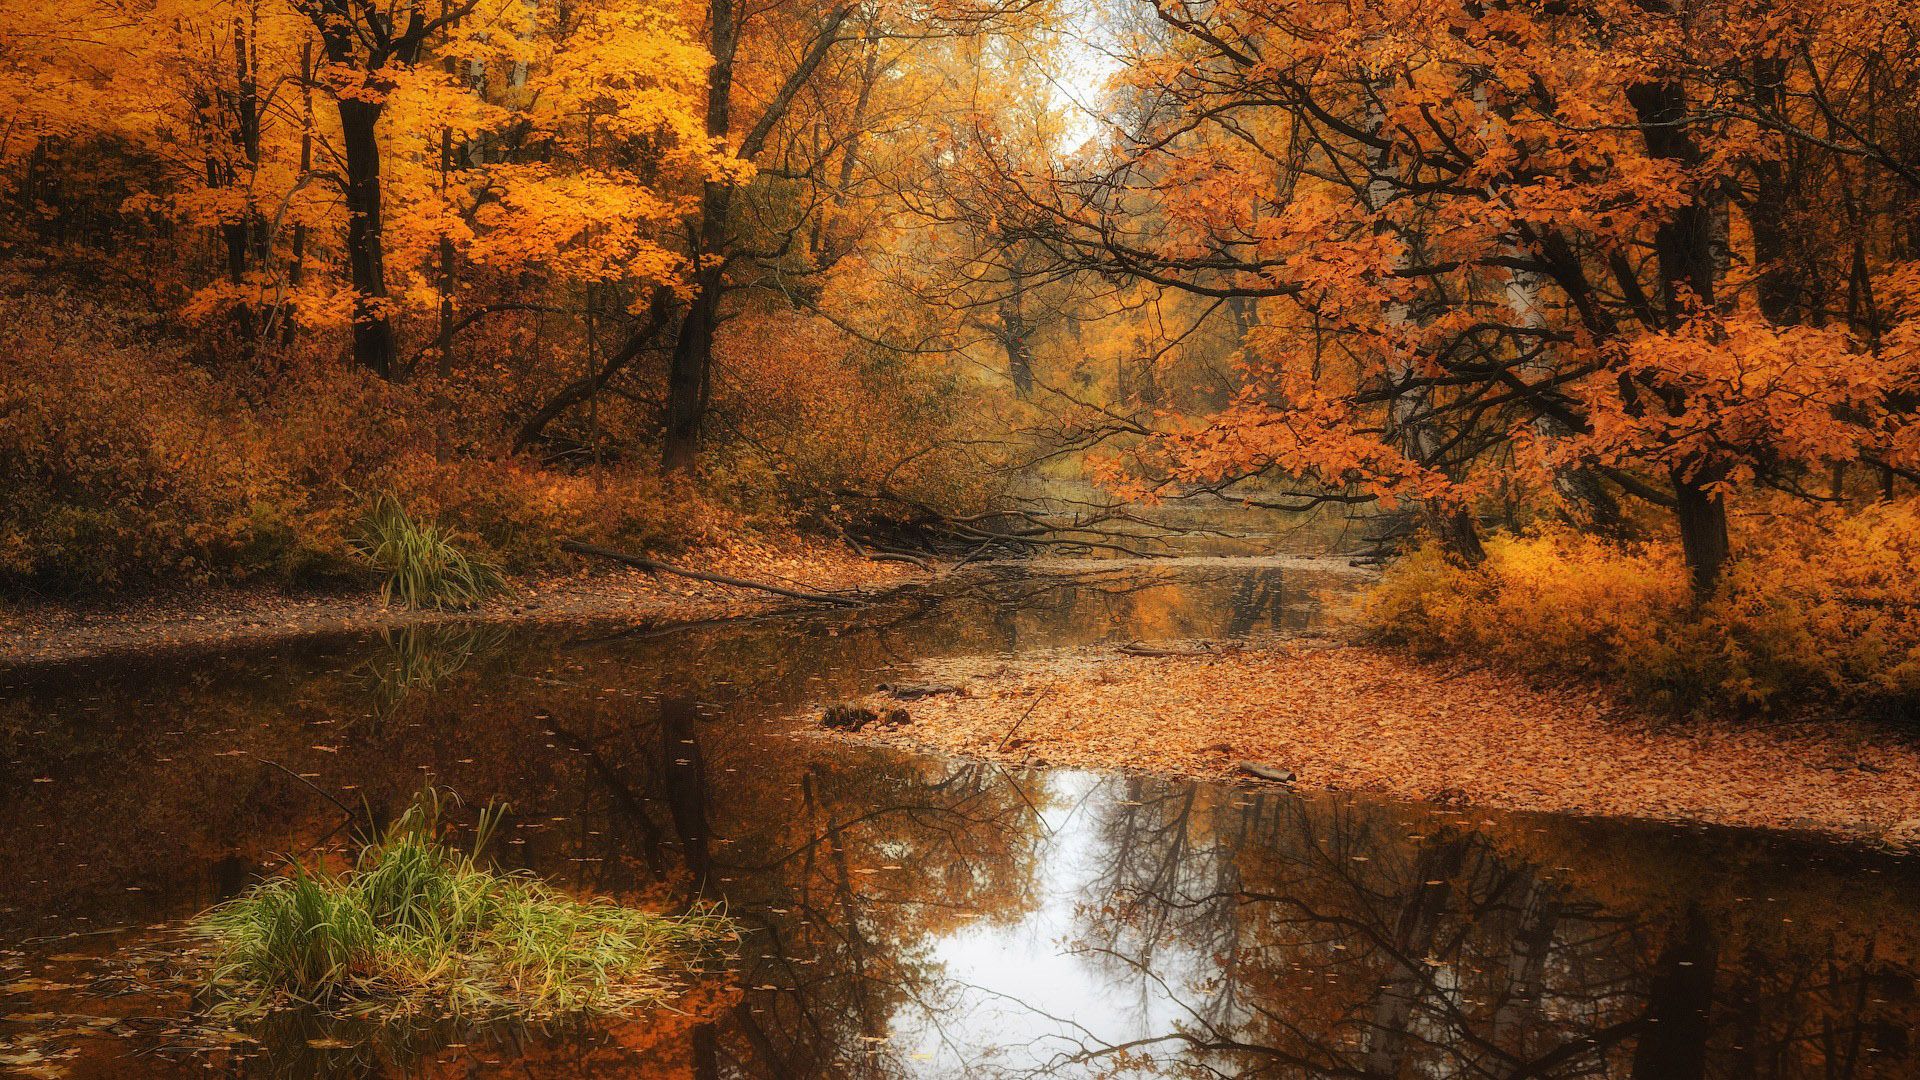 Shallow Stream In The Autumn Forest Nature Hd Wallpaper 1920x1080 3833